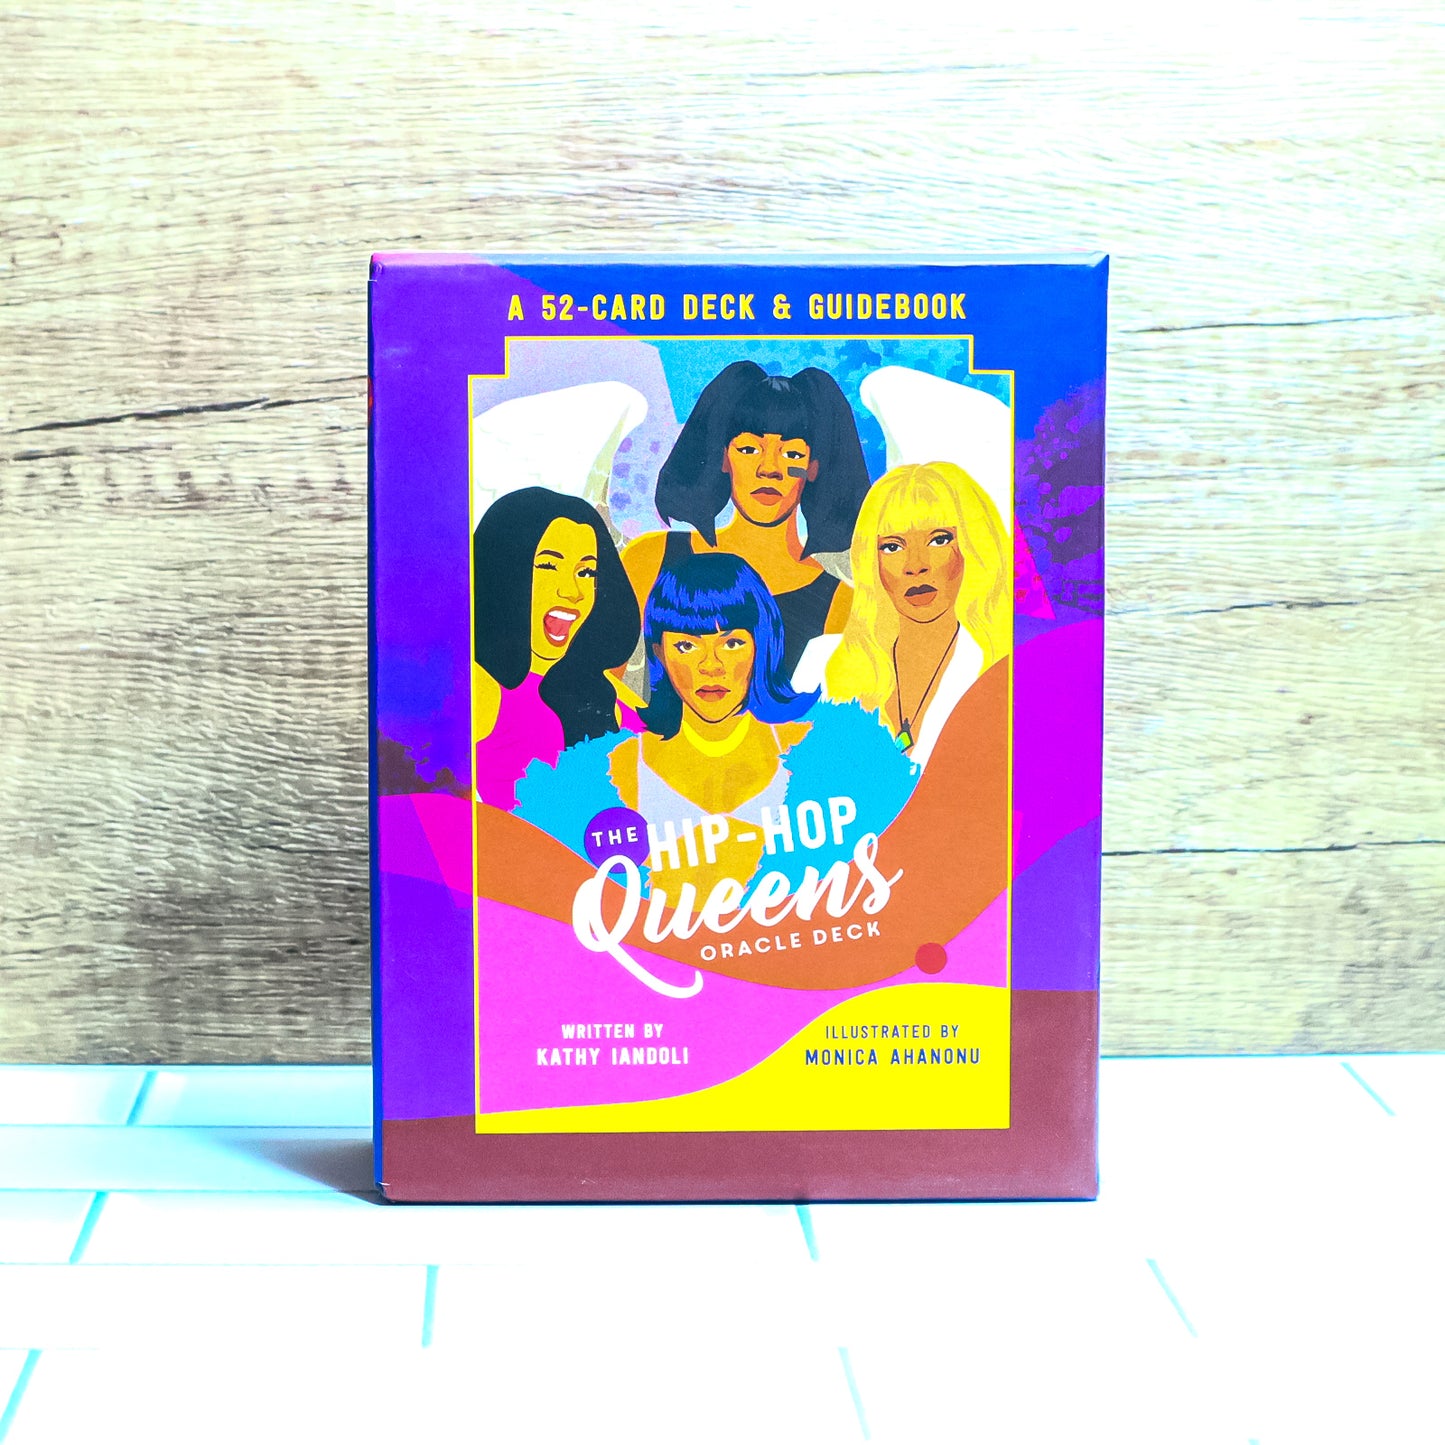 The Hip Hop Queens Used Oracle Deck